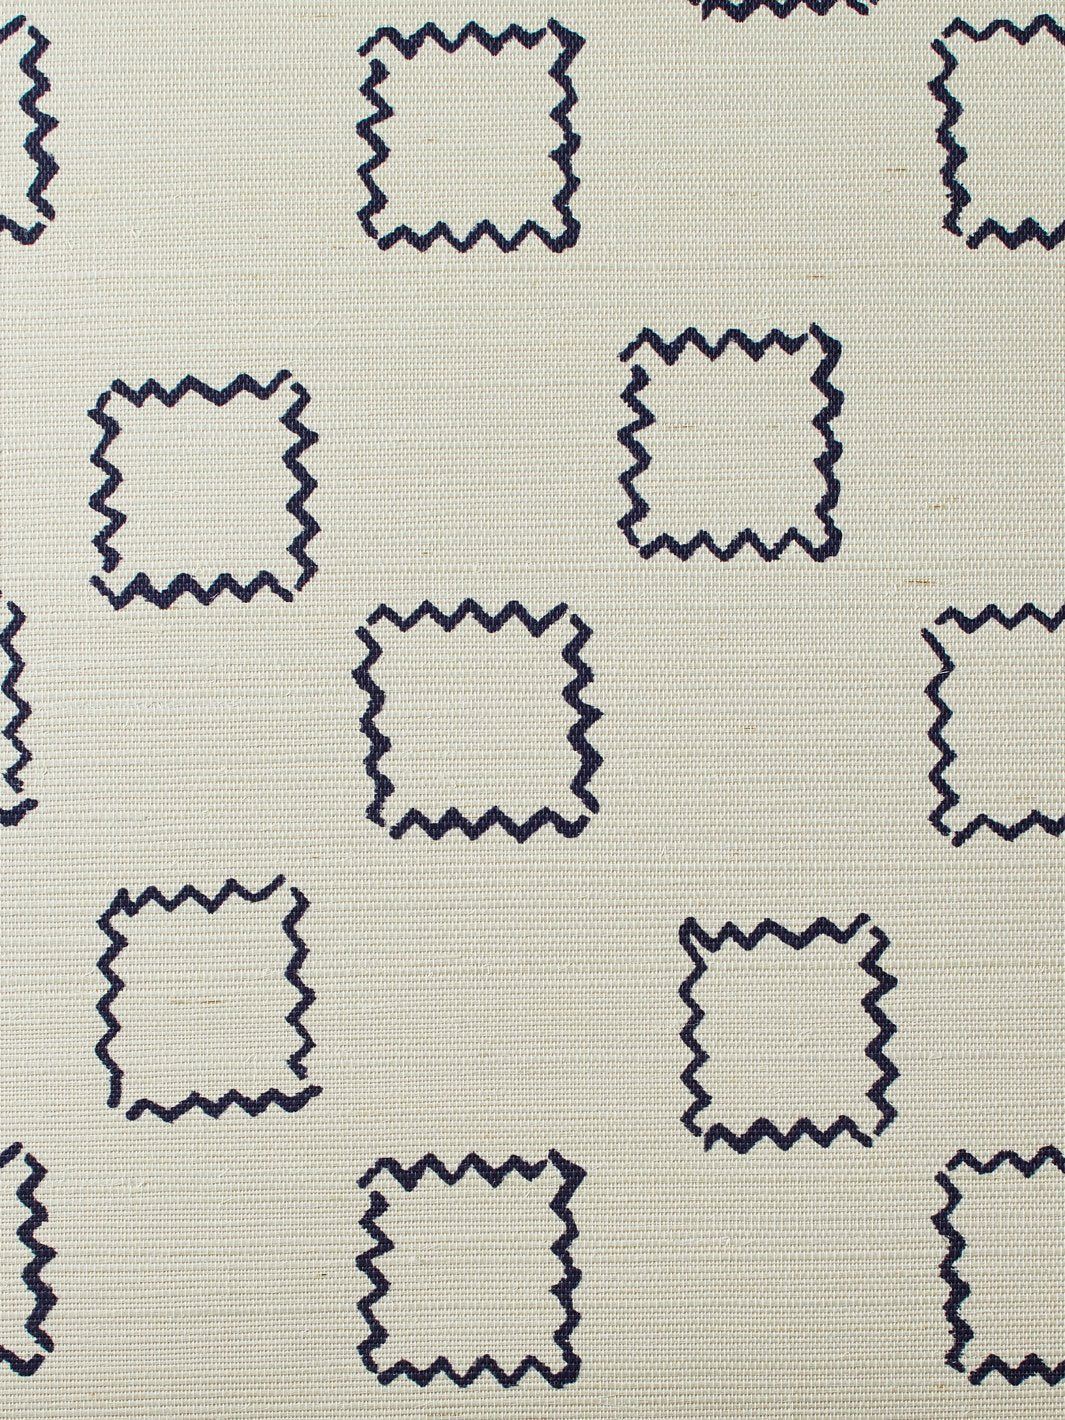 'Zag Square' Grasscloth' Wallpaper by Nathan Turner - Navy